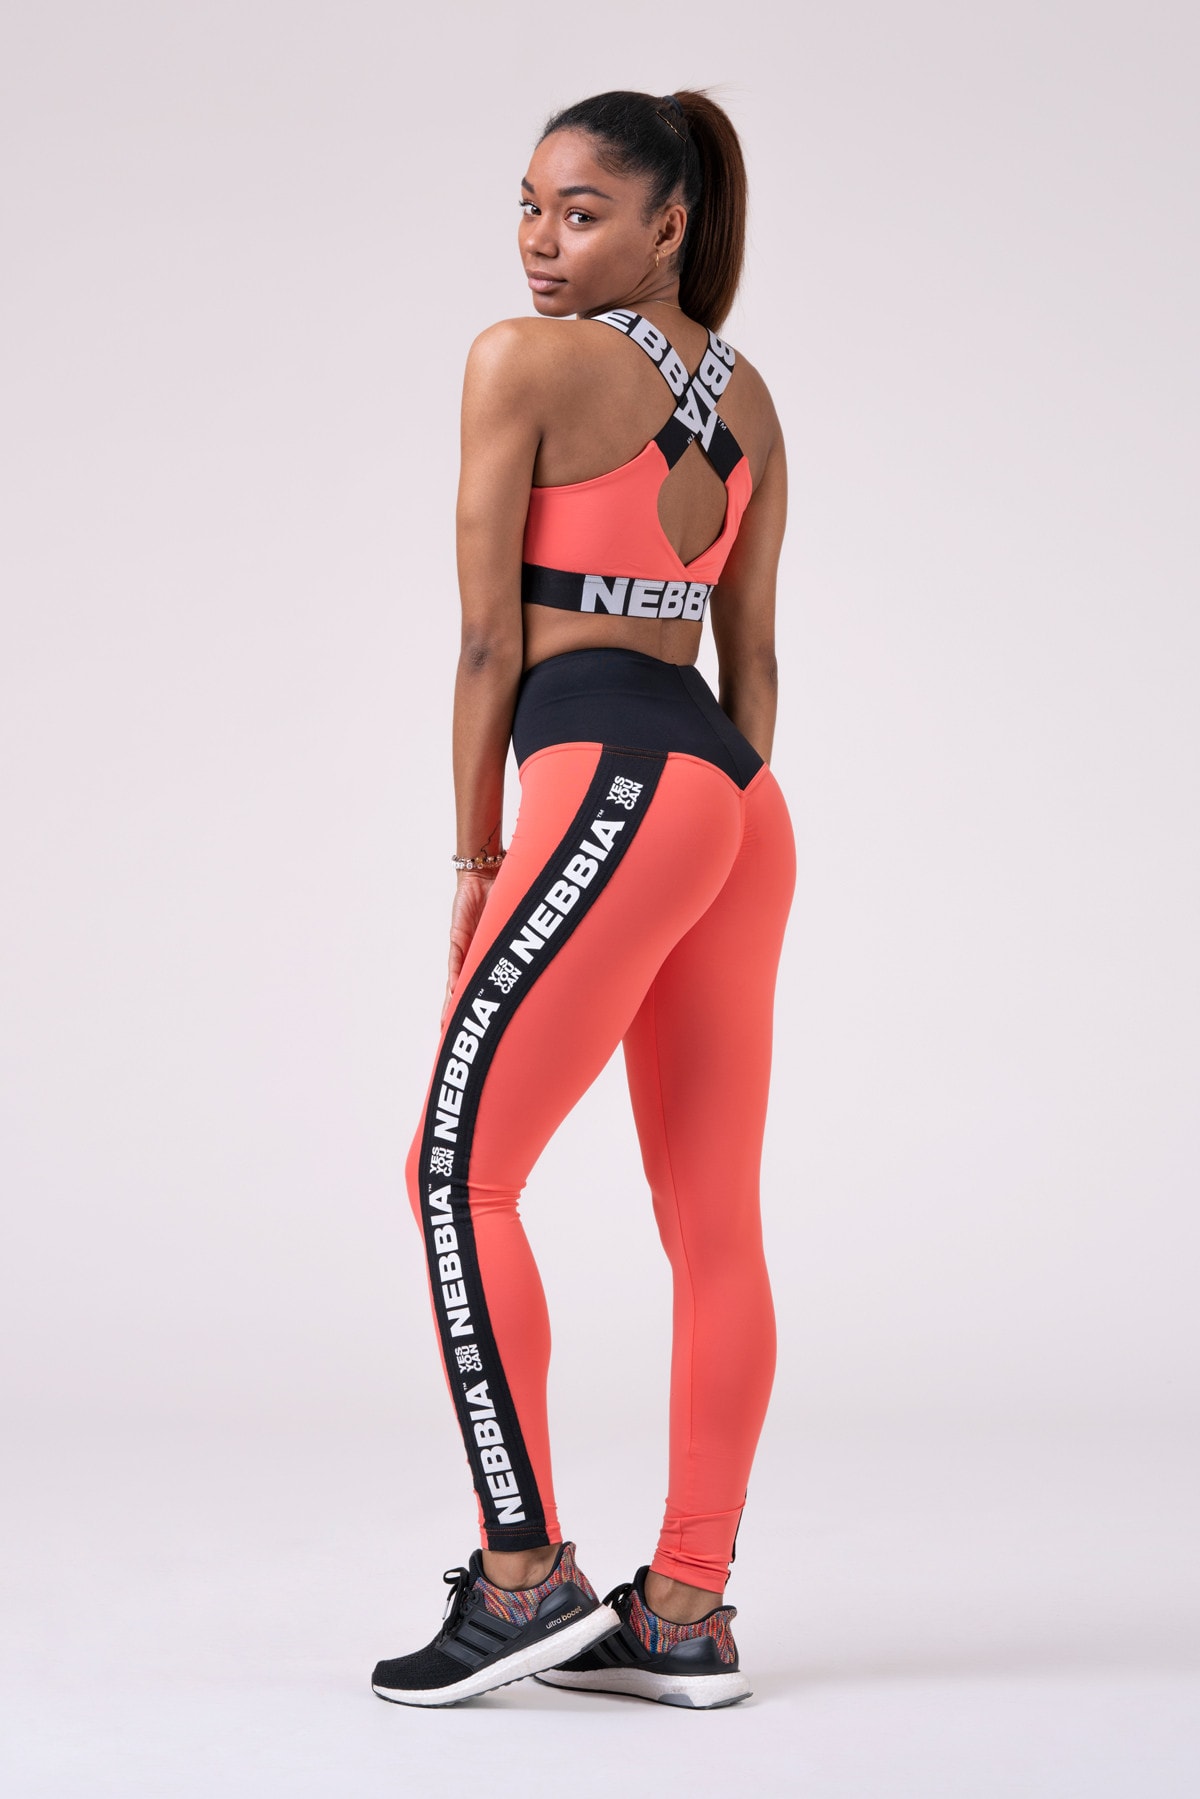 Prozis - The Prozis BFF Leggings bring you a special